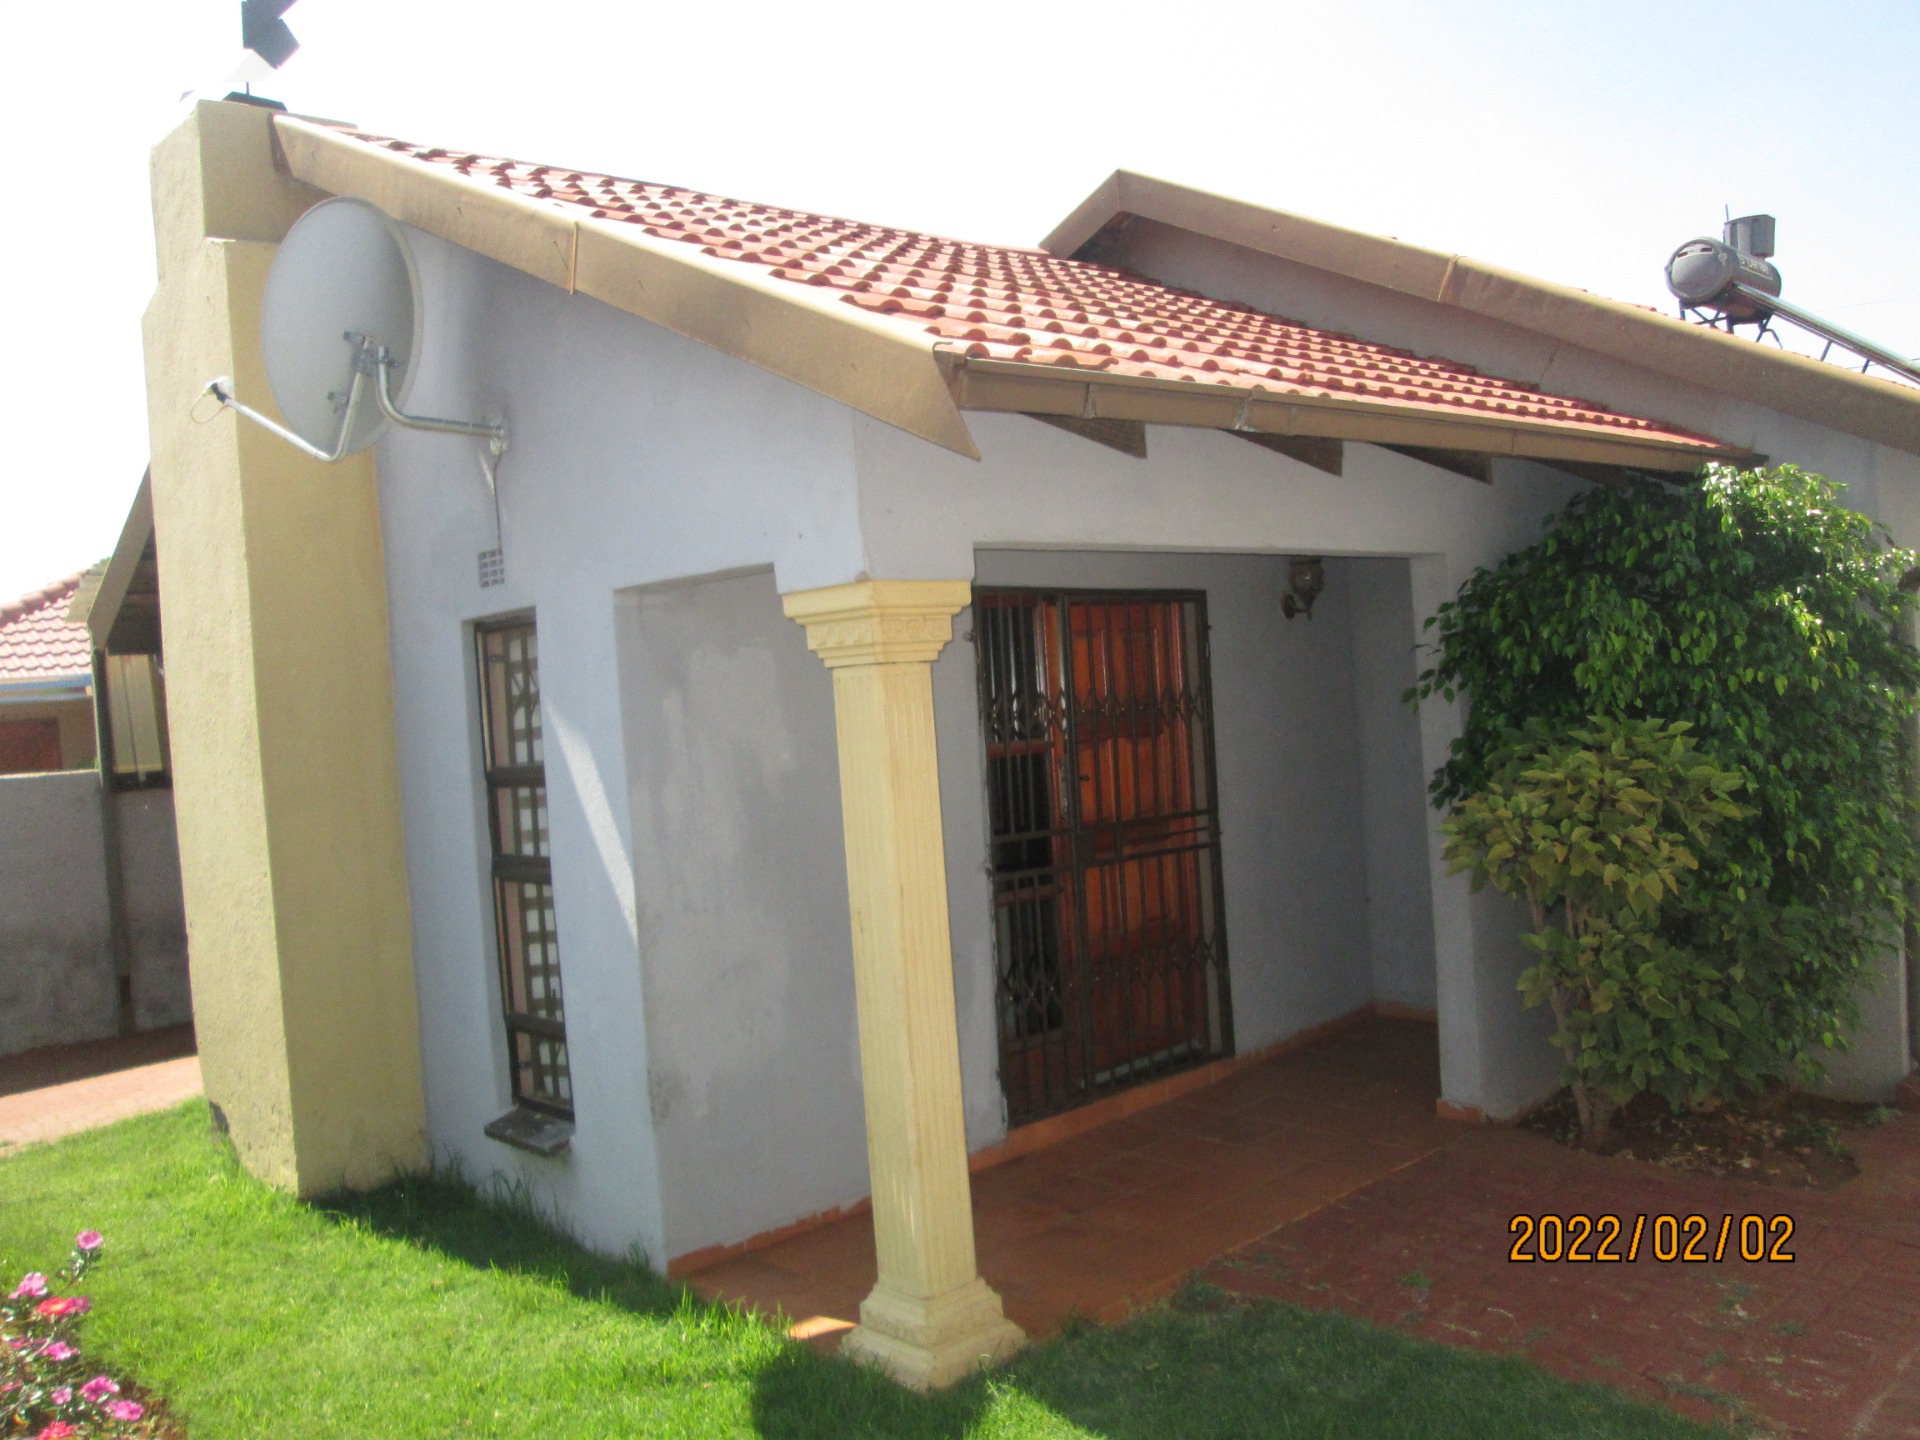 House For Sale in Protea Glen